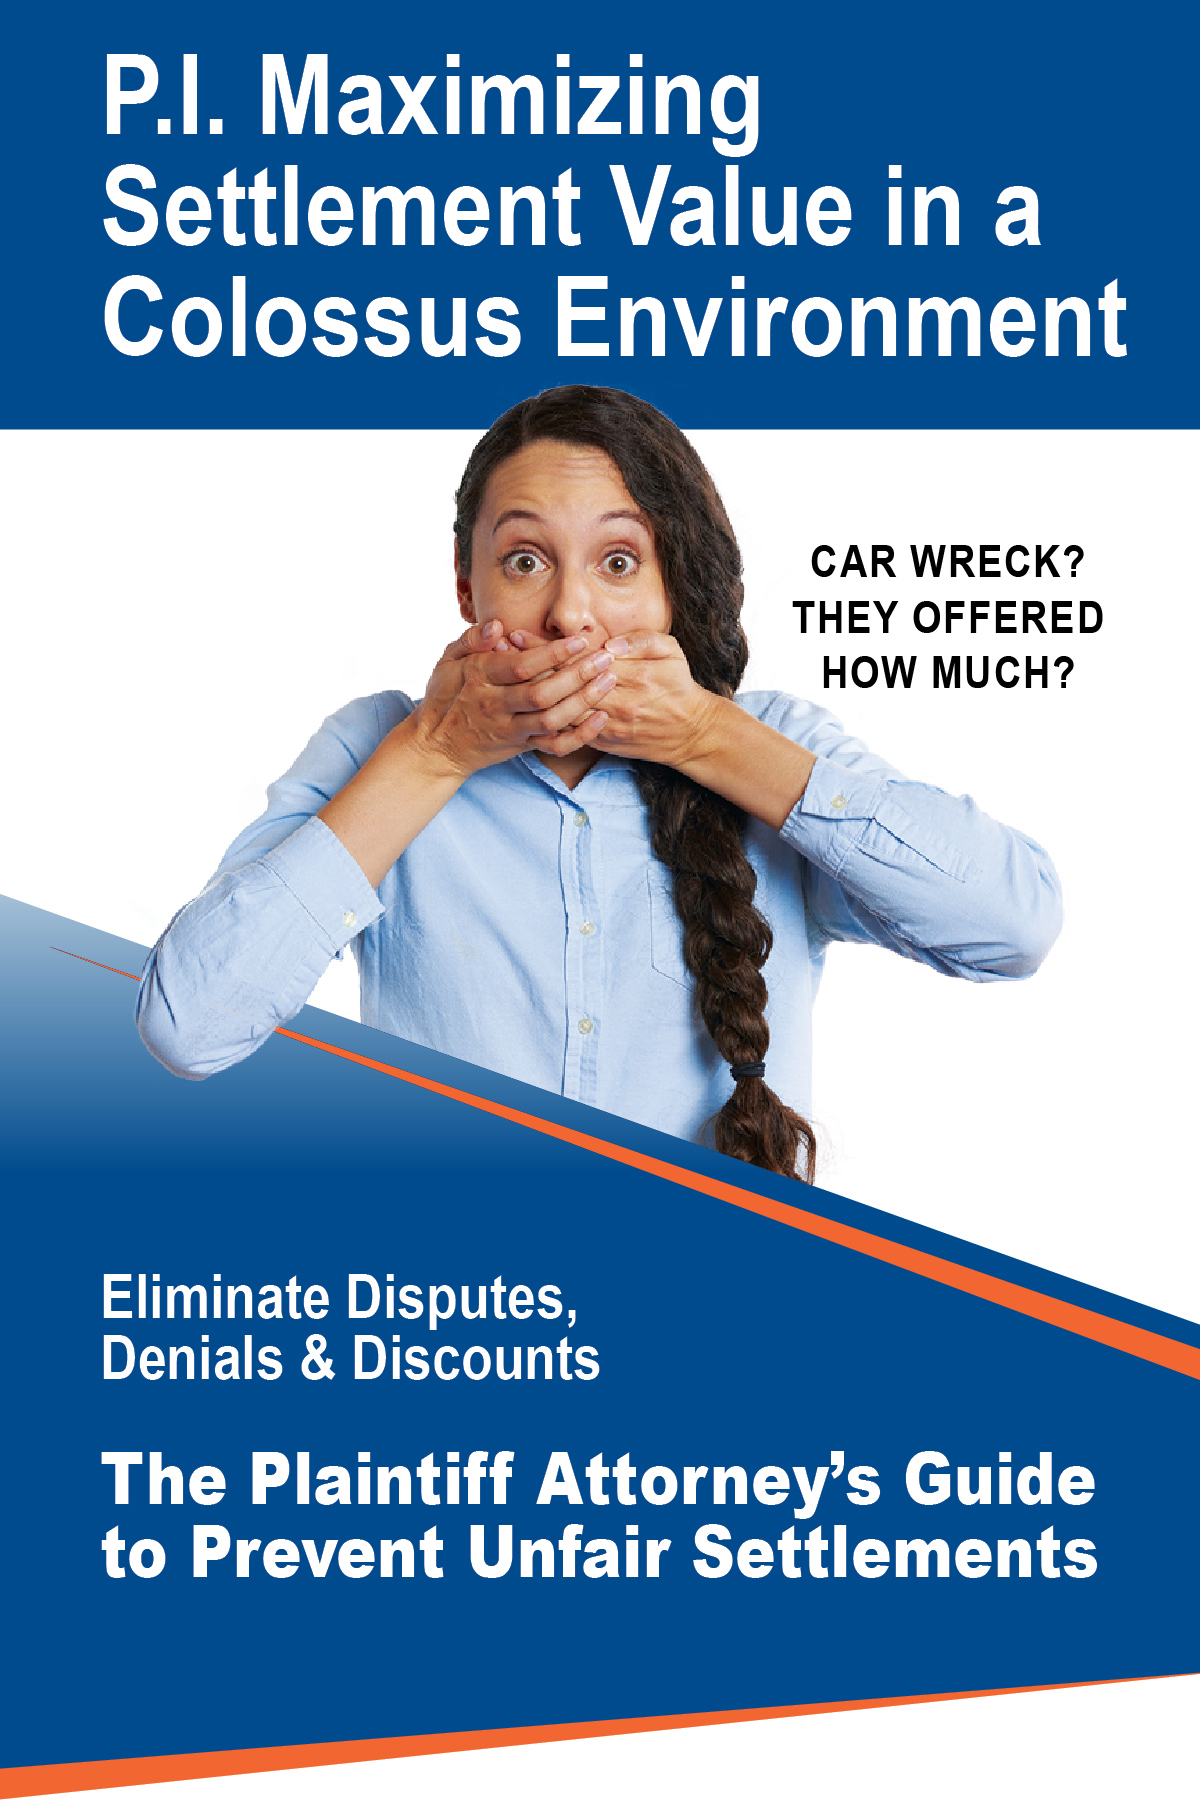 P.I. Maximizing Settlement Value in a Colossus Environment E-Book